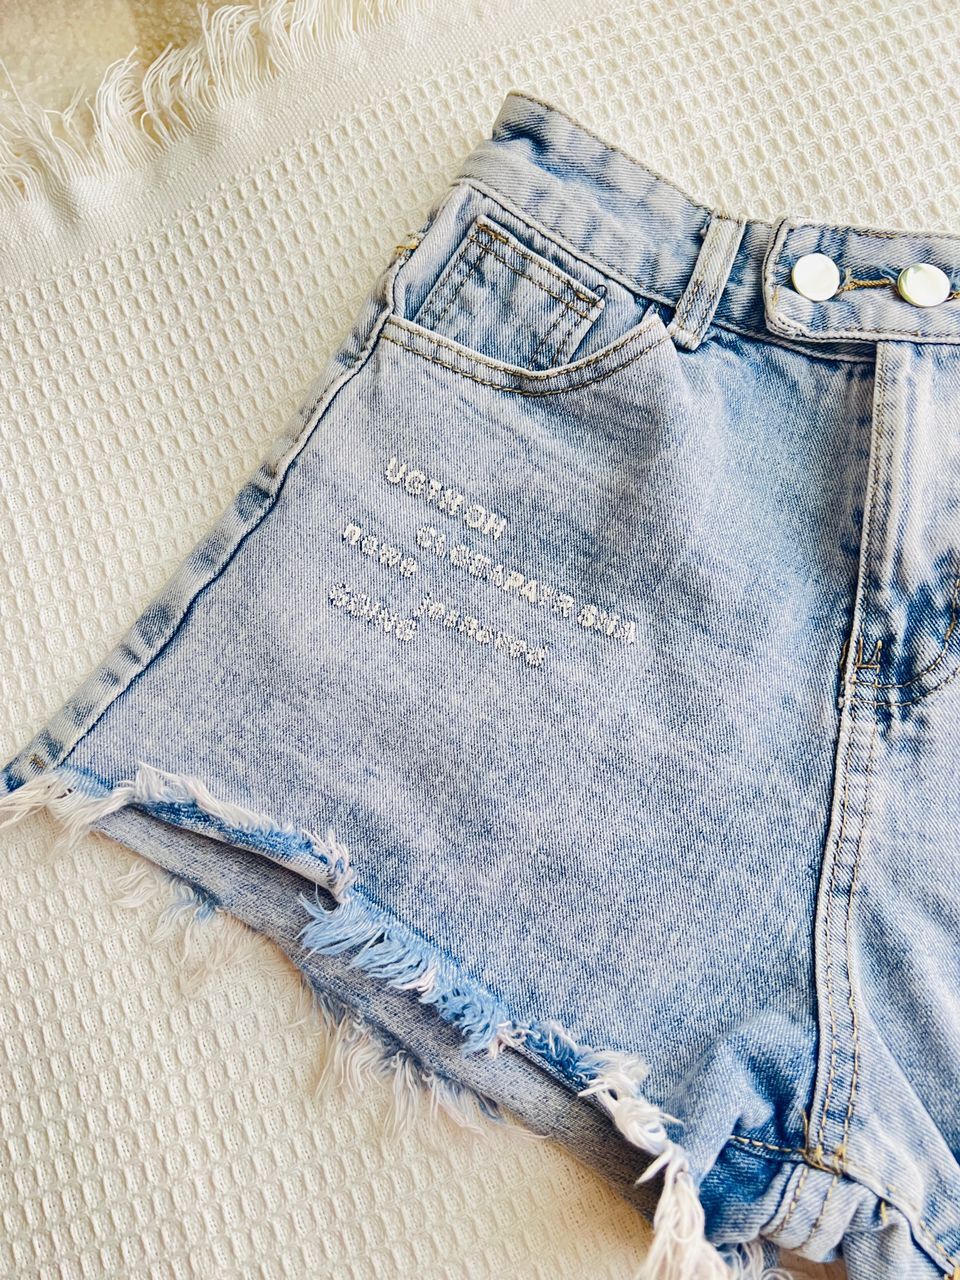 Women's Distressed Jeans: Shop Ripped Jean Shorts & Pants | Levi's® US